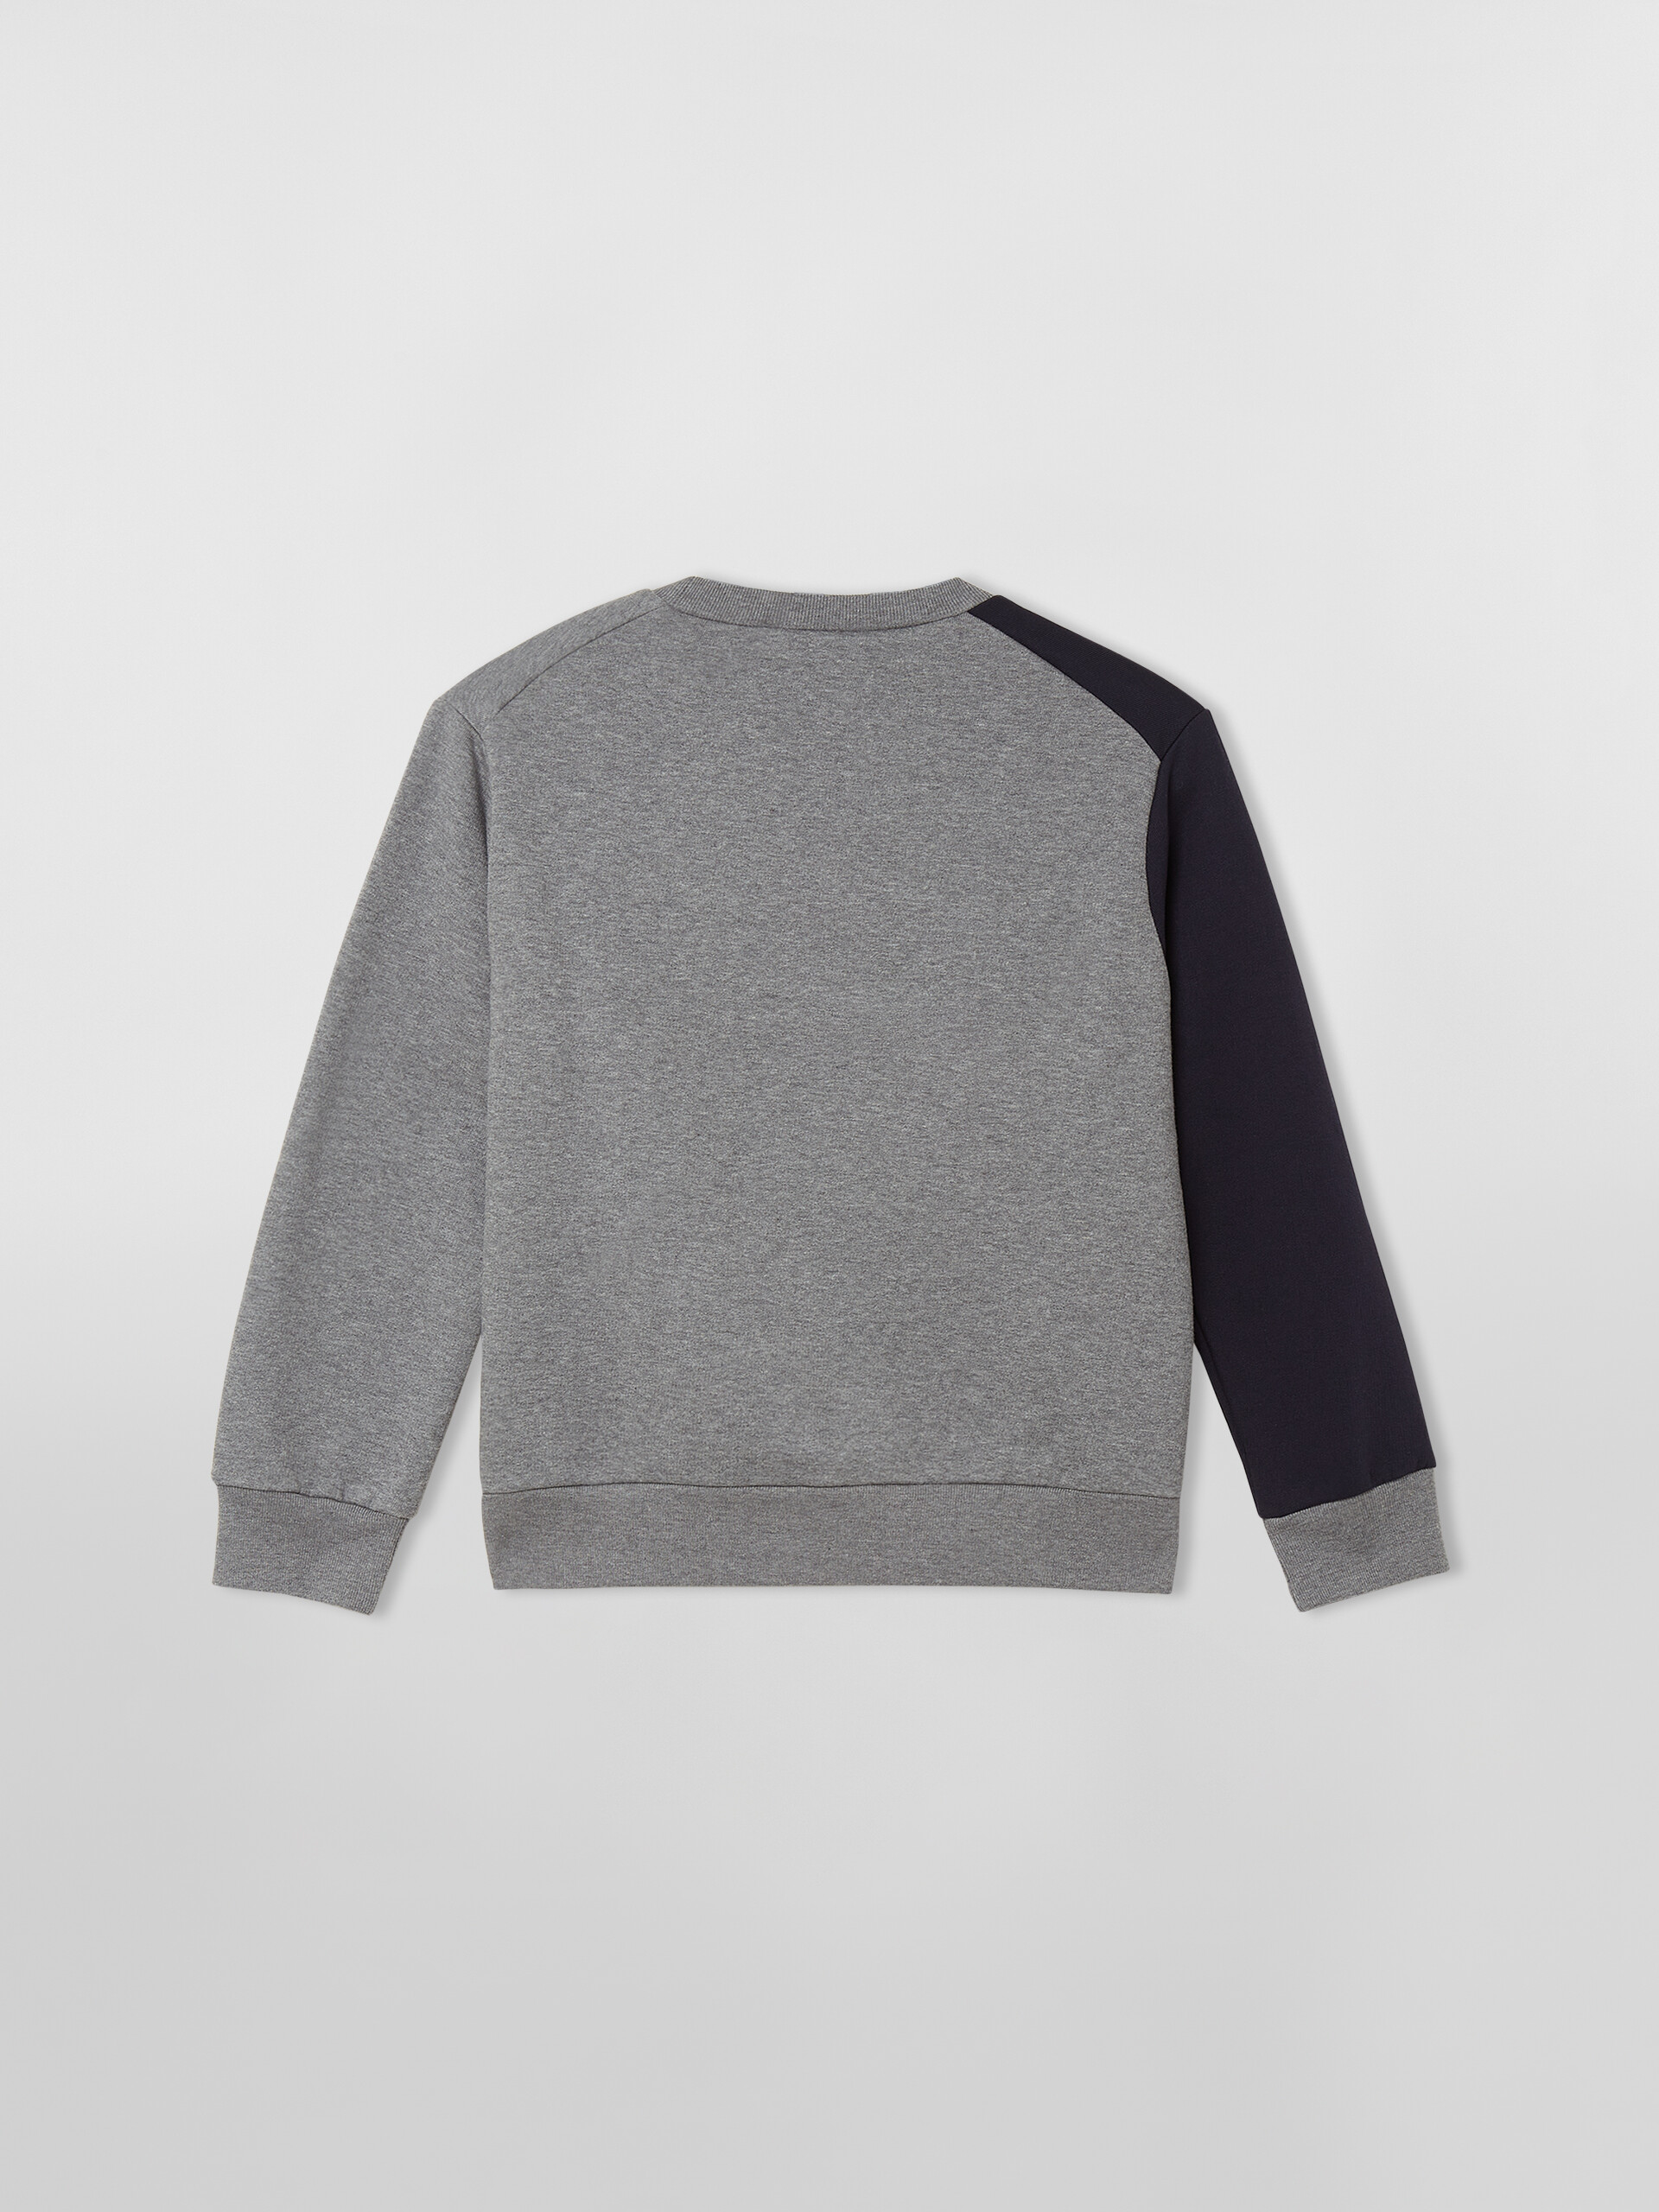 BICOLOR SWEATSHIRT WITH BIG "M" ON THE FRONT - Sweaters - Image 2